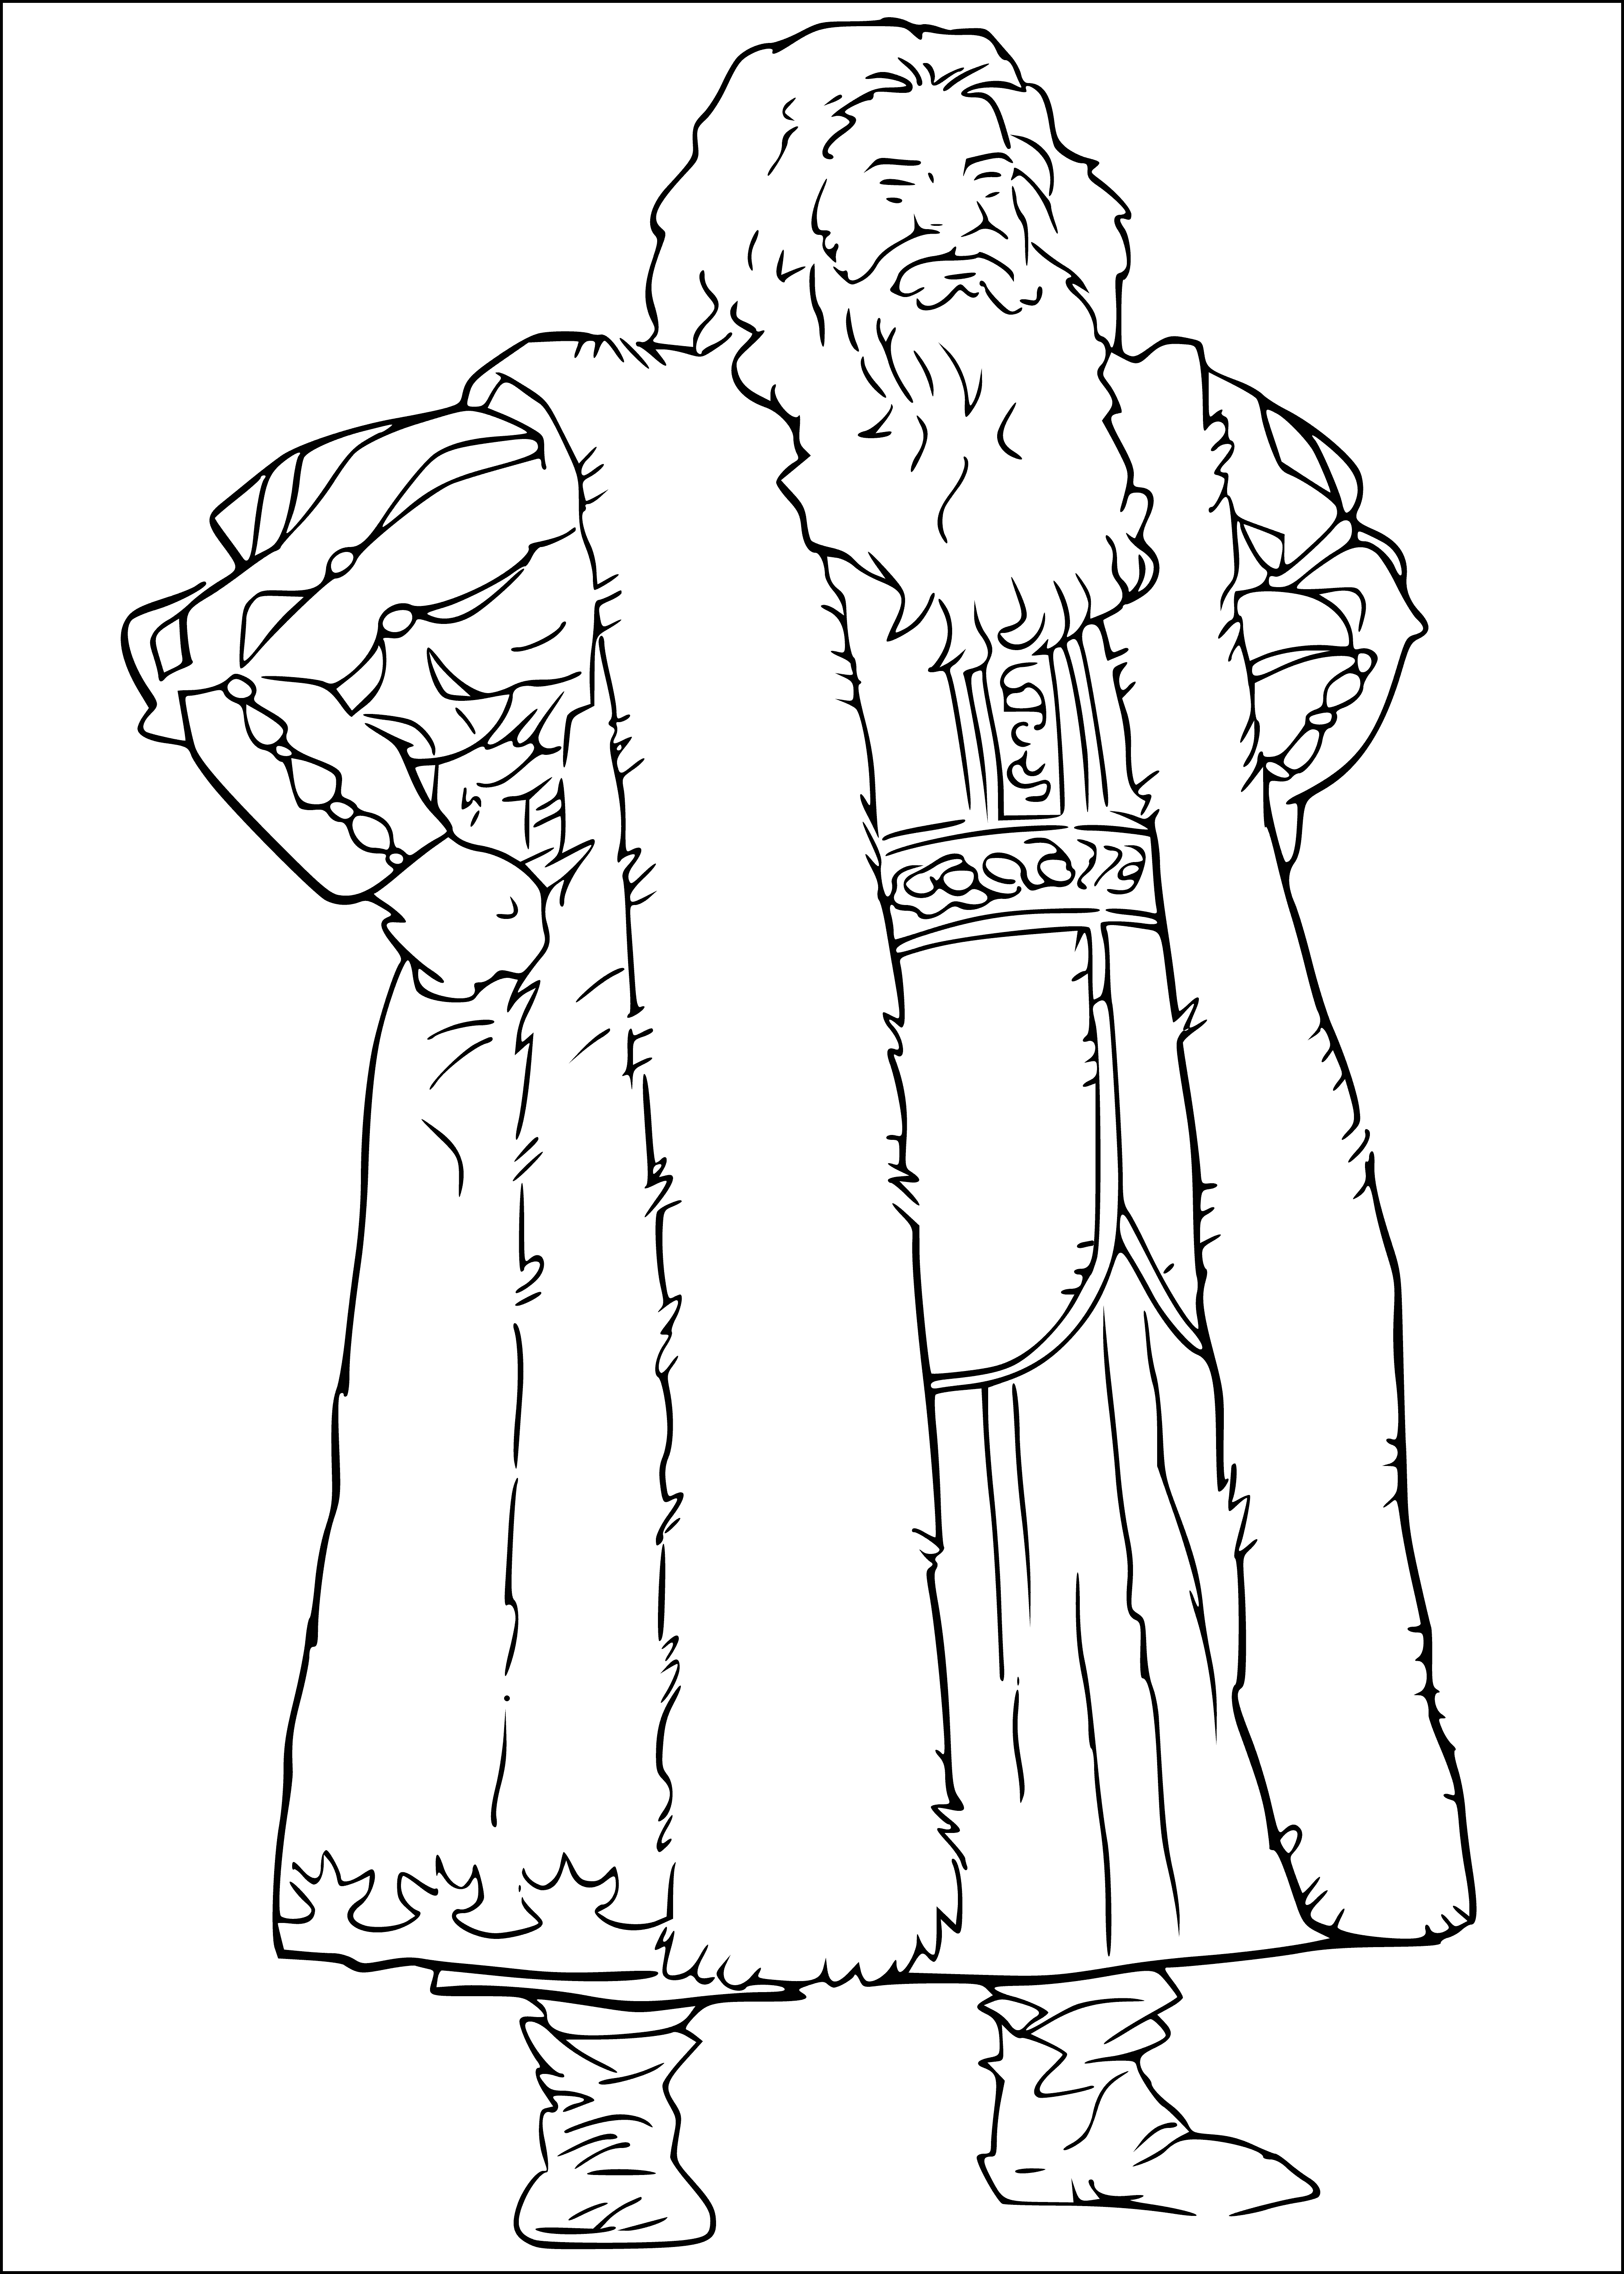 coloring page: Coloring page w/ lion, white witch, wardrobe, Santa Claus in lower left corner.